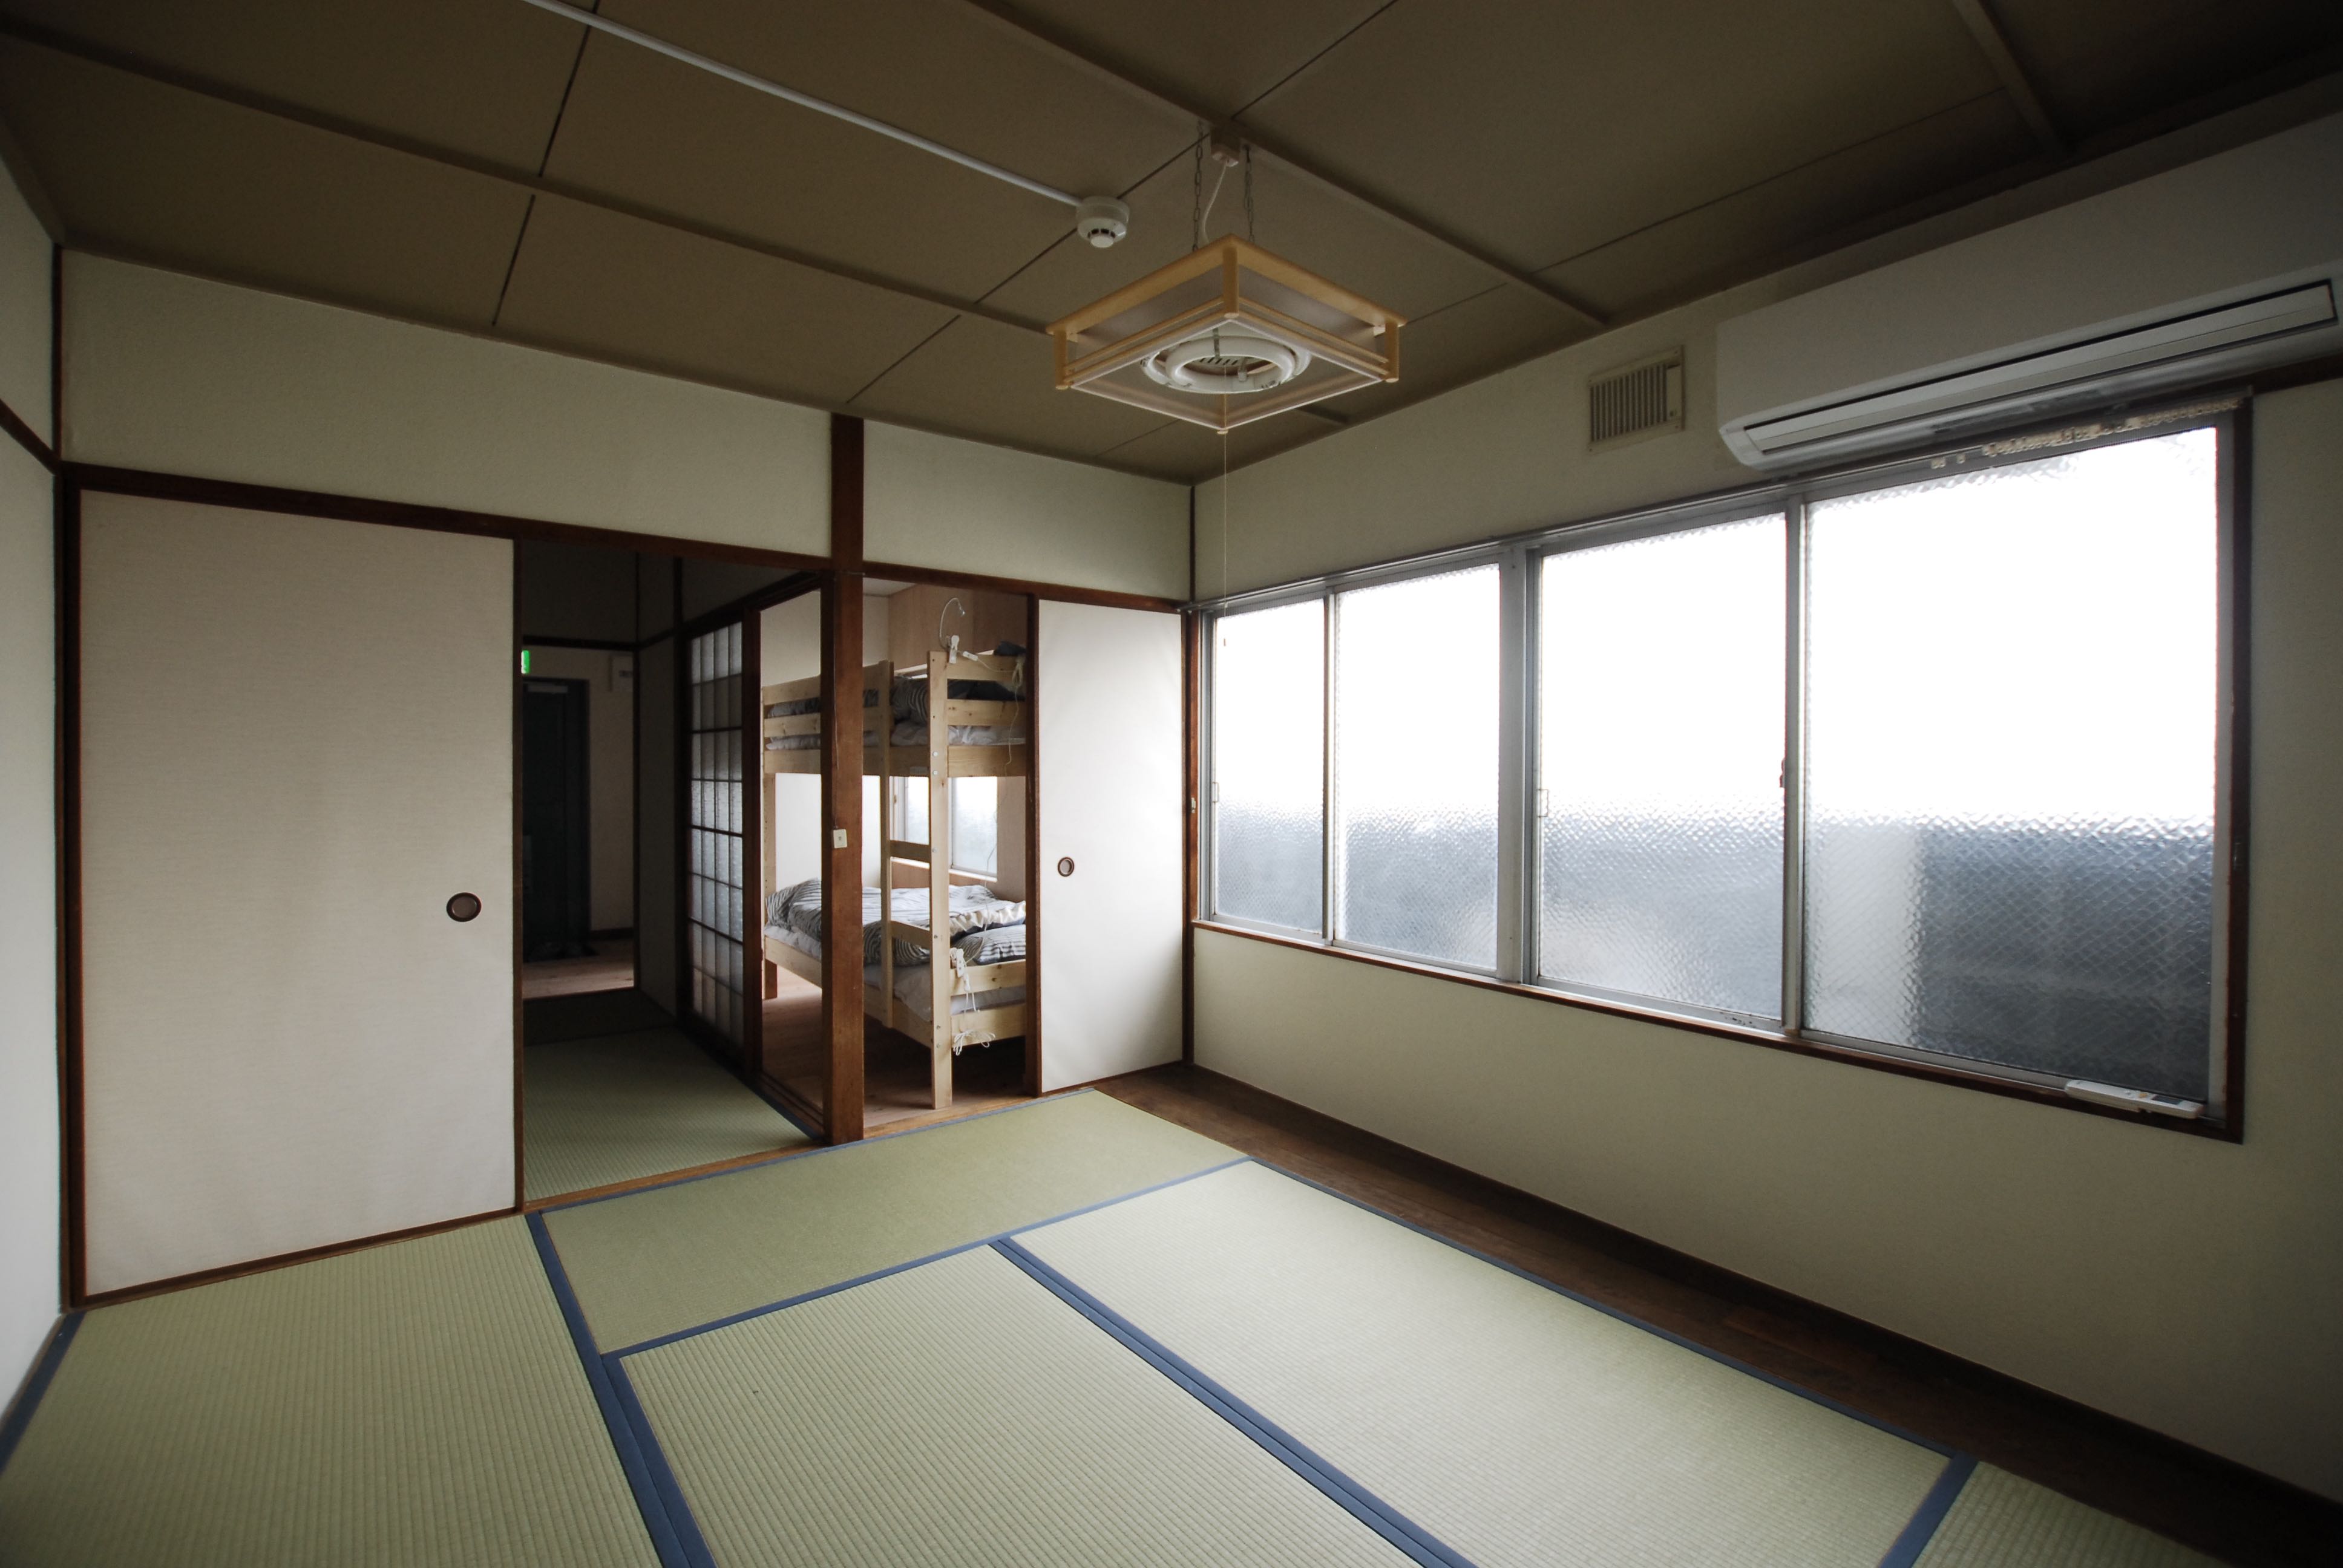 Typical Japanese room called 